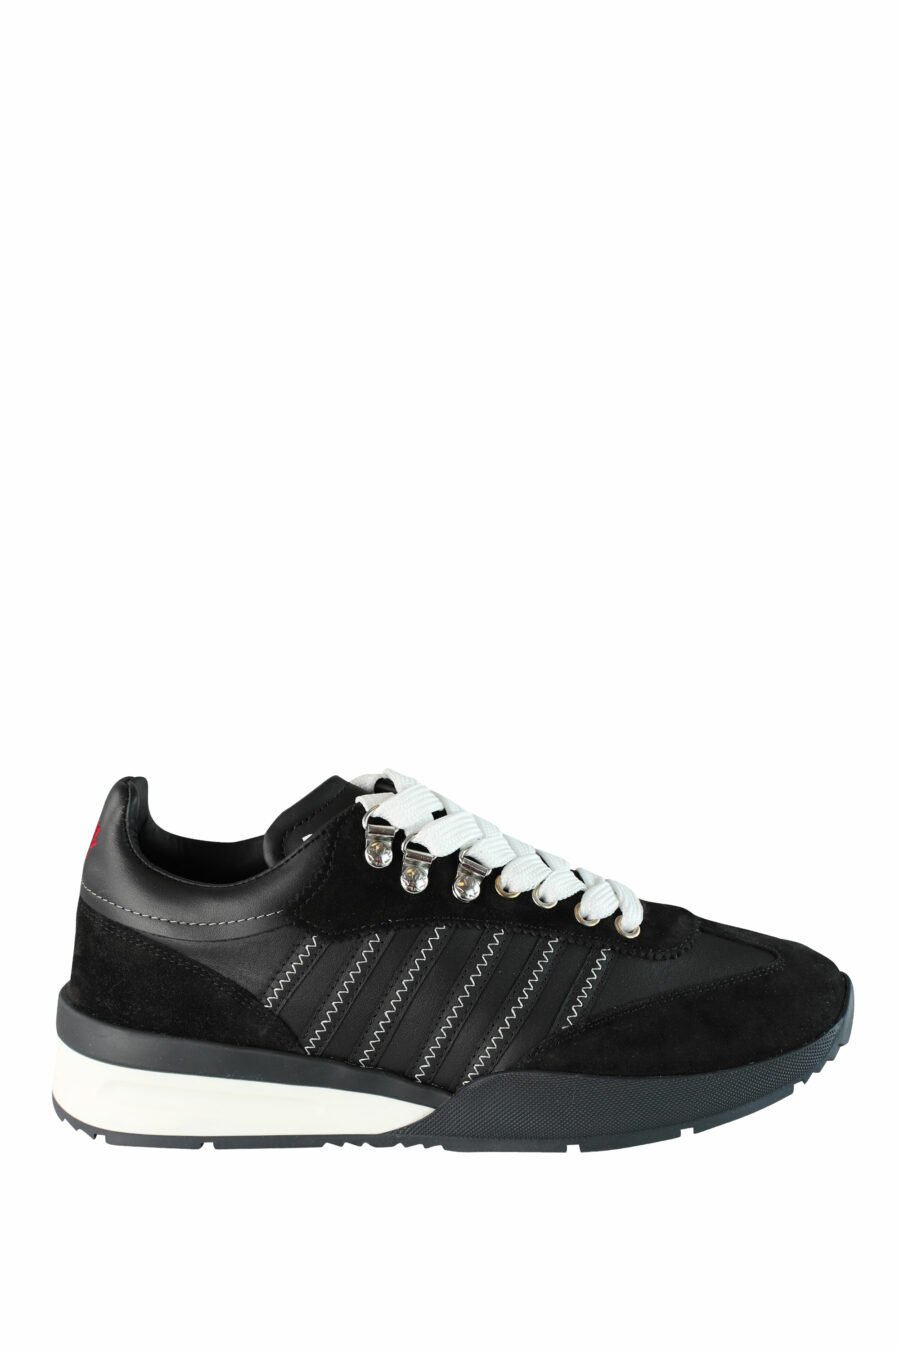 Original legend" black mix trainers with two-tone sole and diagonal lines - IMG 1482